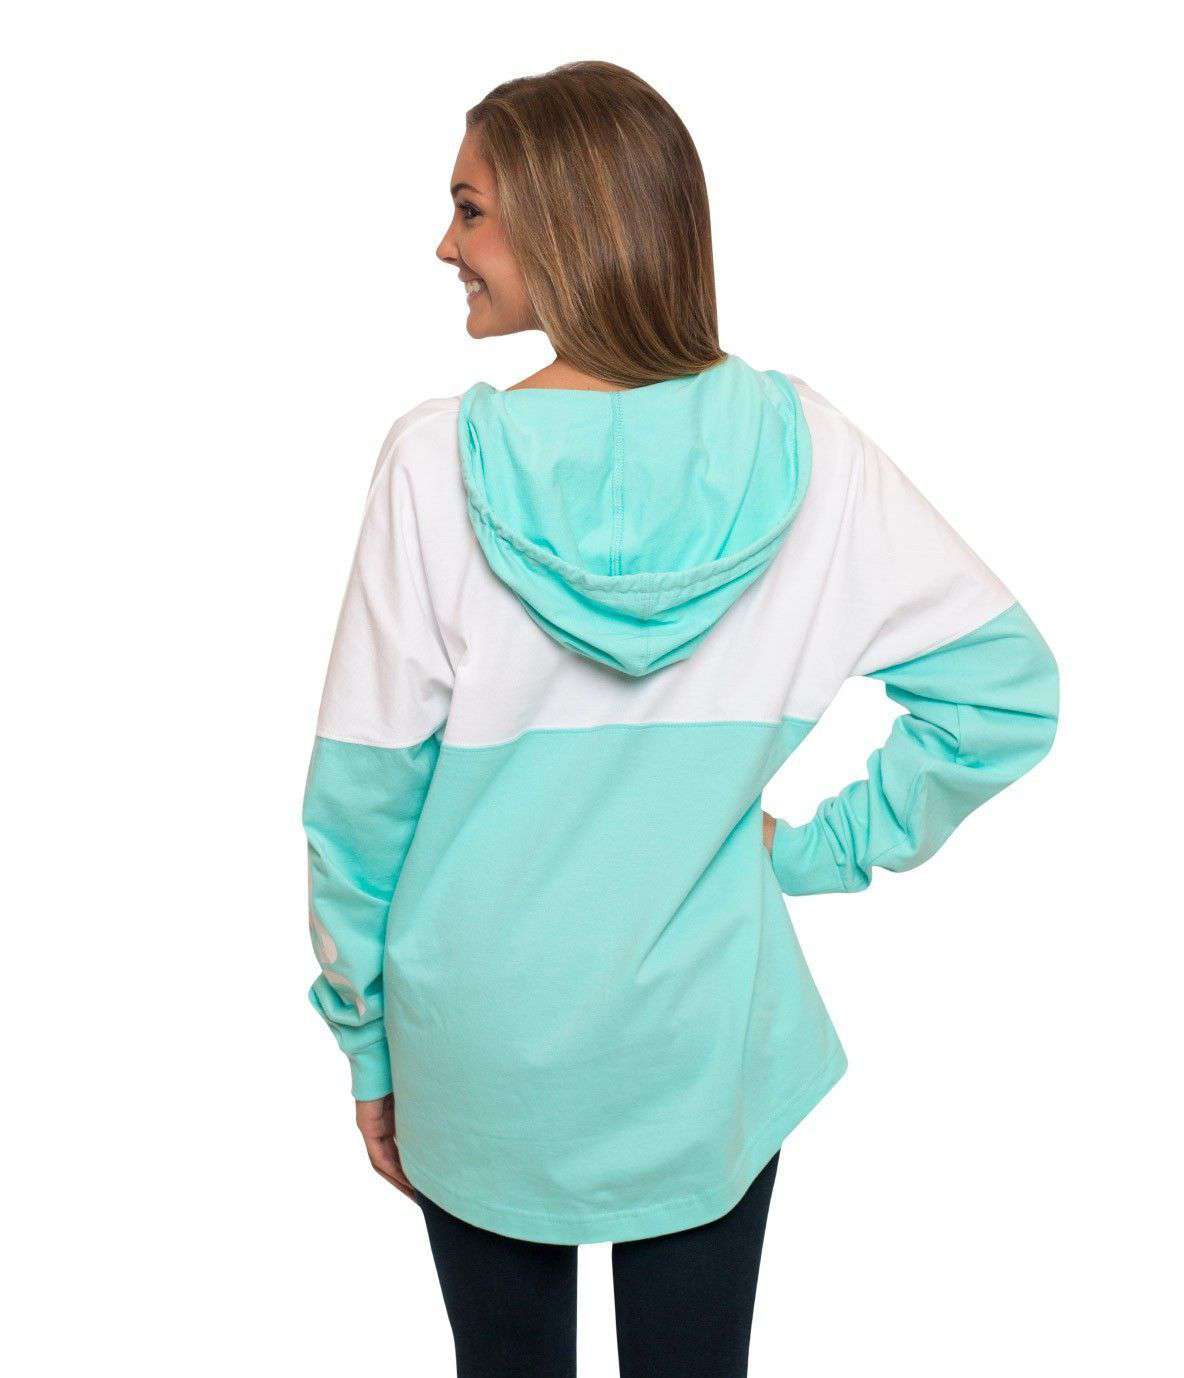 V-Neck Hoodie in Ocean Blue by The Southern Shirt Co. - Country Club Prep